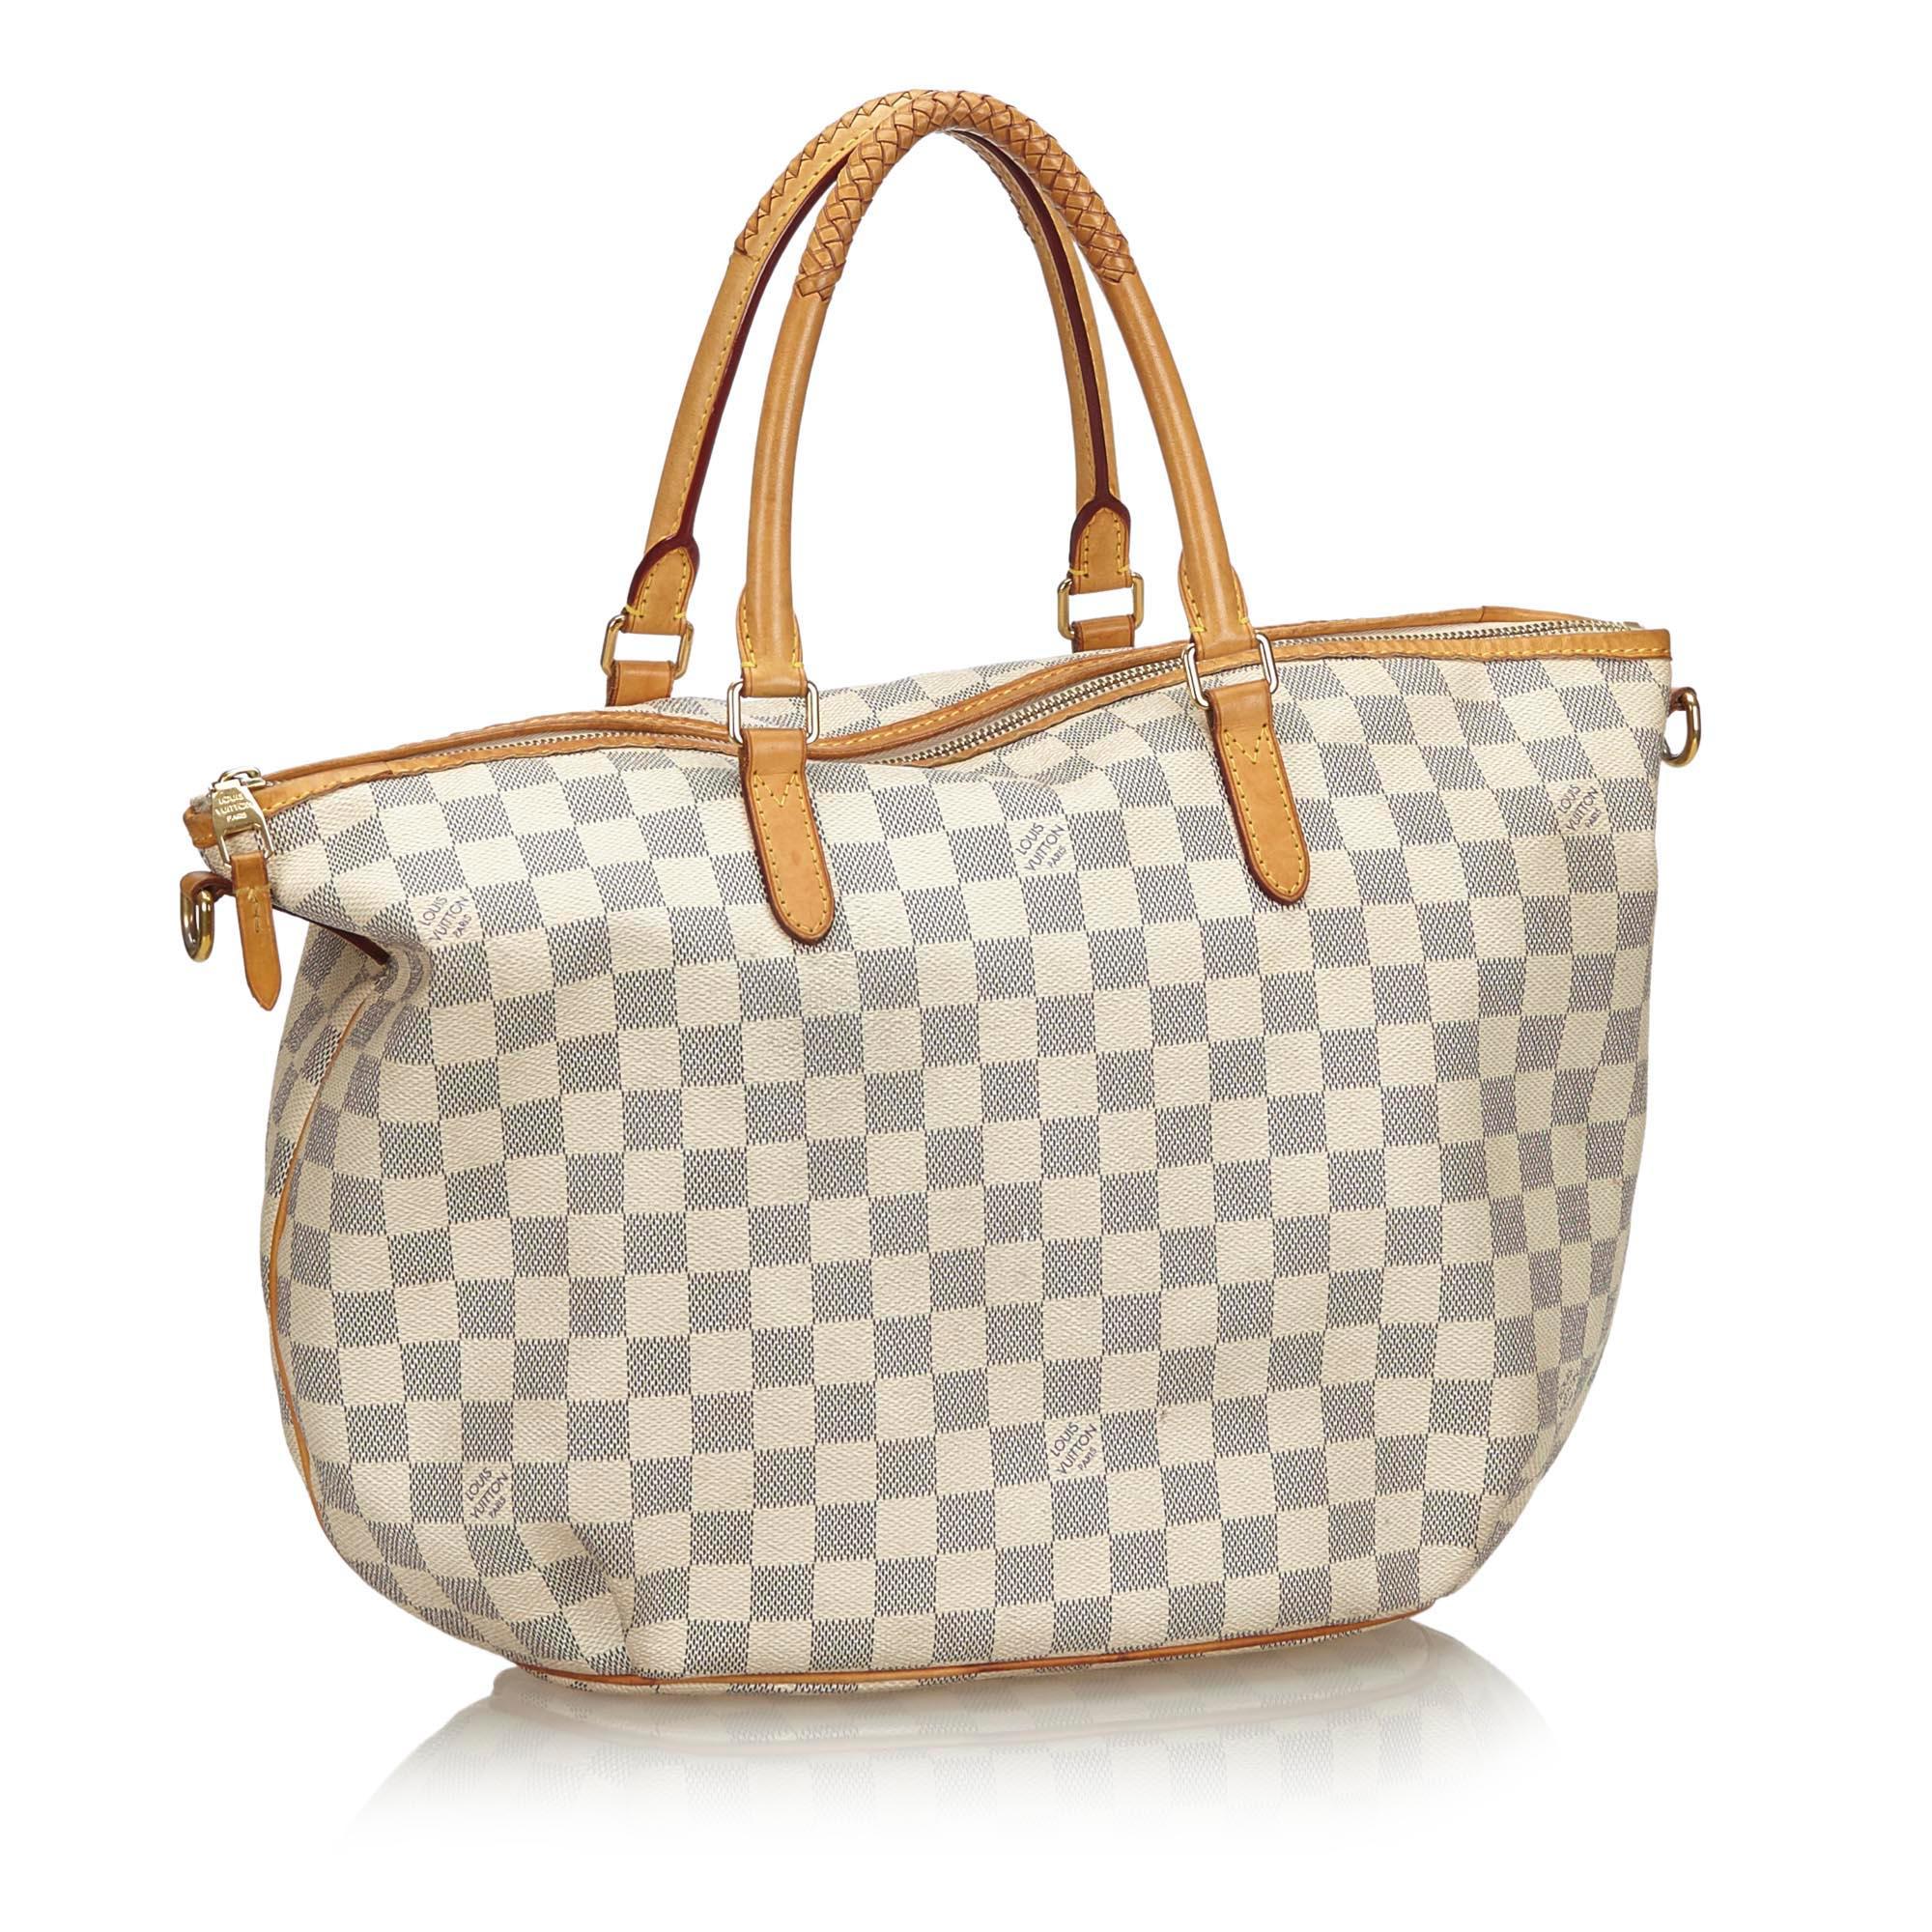 The Riviera features a damier azur body with vachetta leather trim, rolled leather handles, a detachable flat leather strap, a top zip closure, and interior slip pockets. It carries as B+ condition rating.

Inclusions: 
This item does not come with